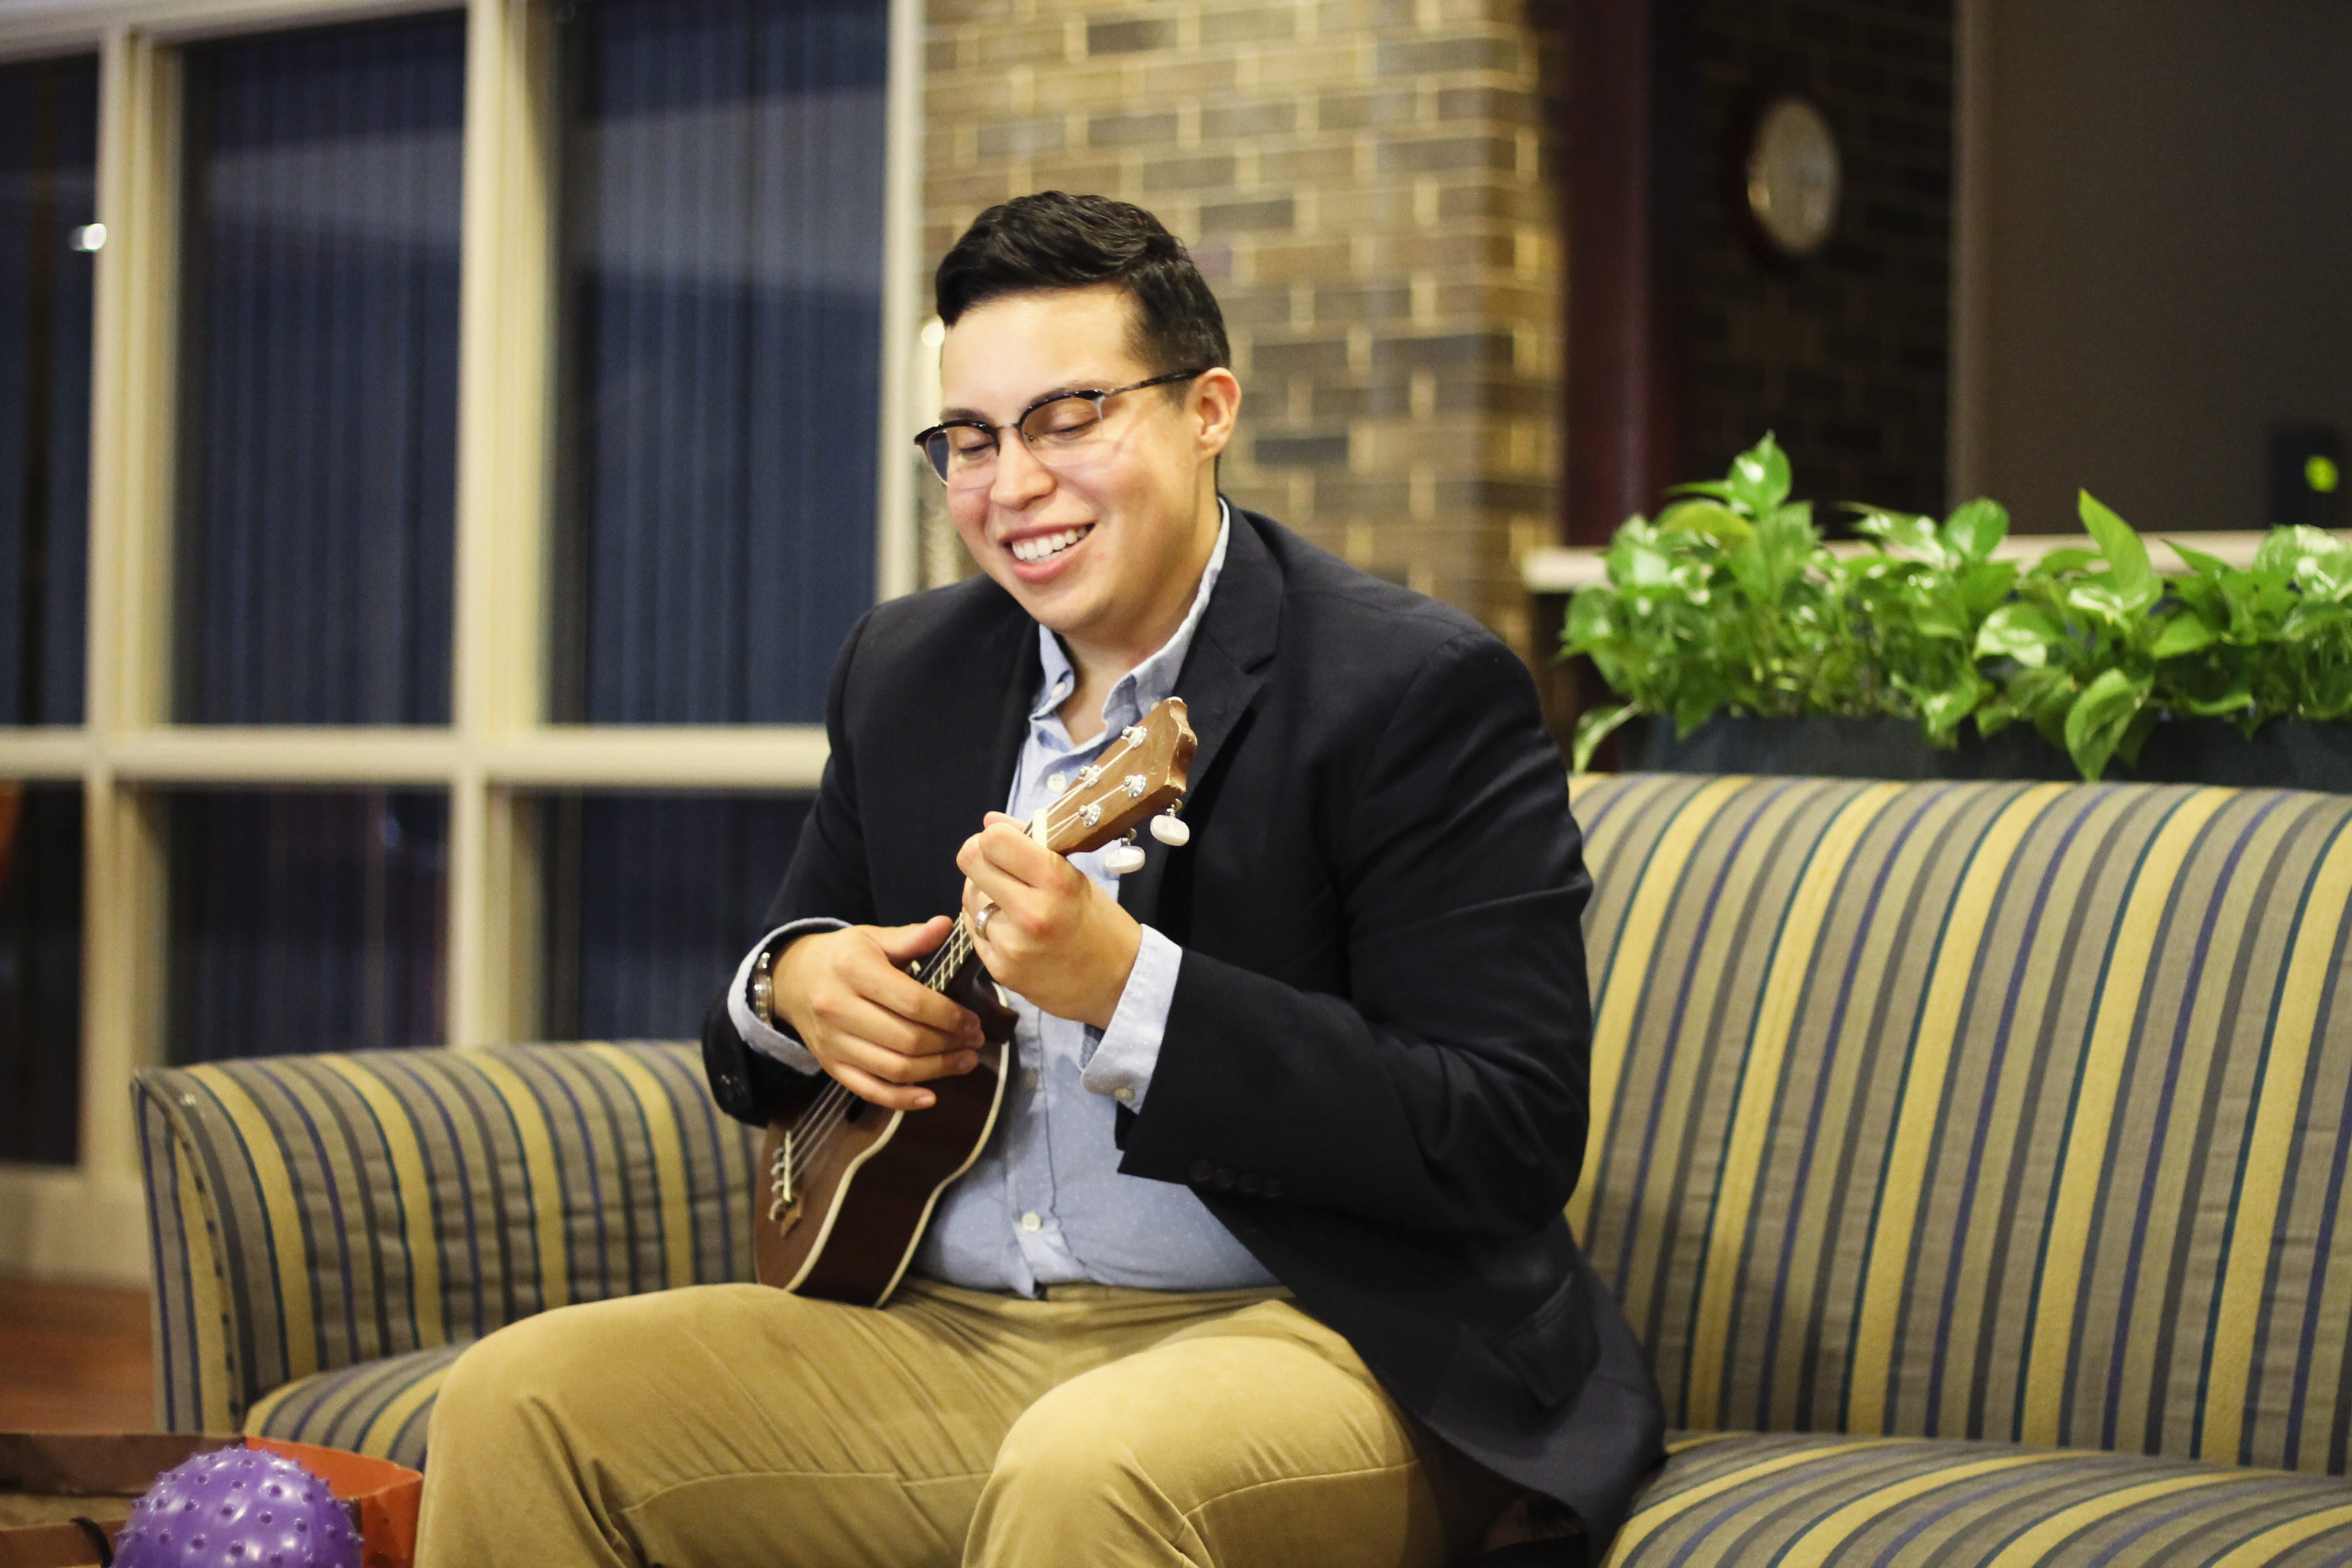 Dan Stewart incorporates ukulele music into therapy for patients who have dementia.